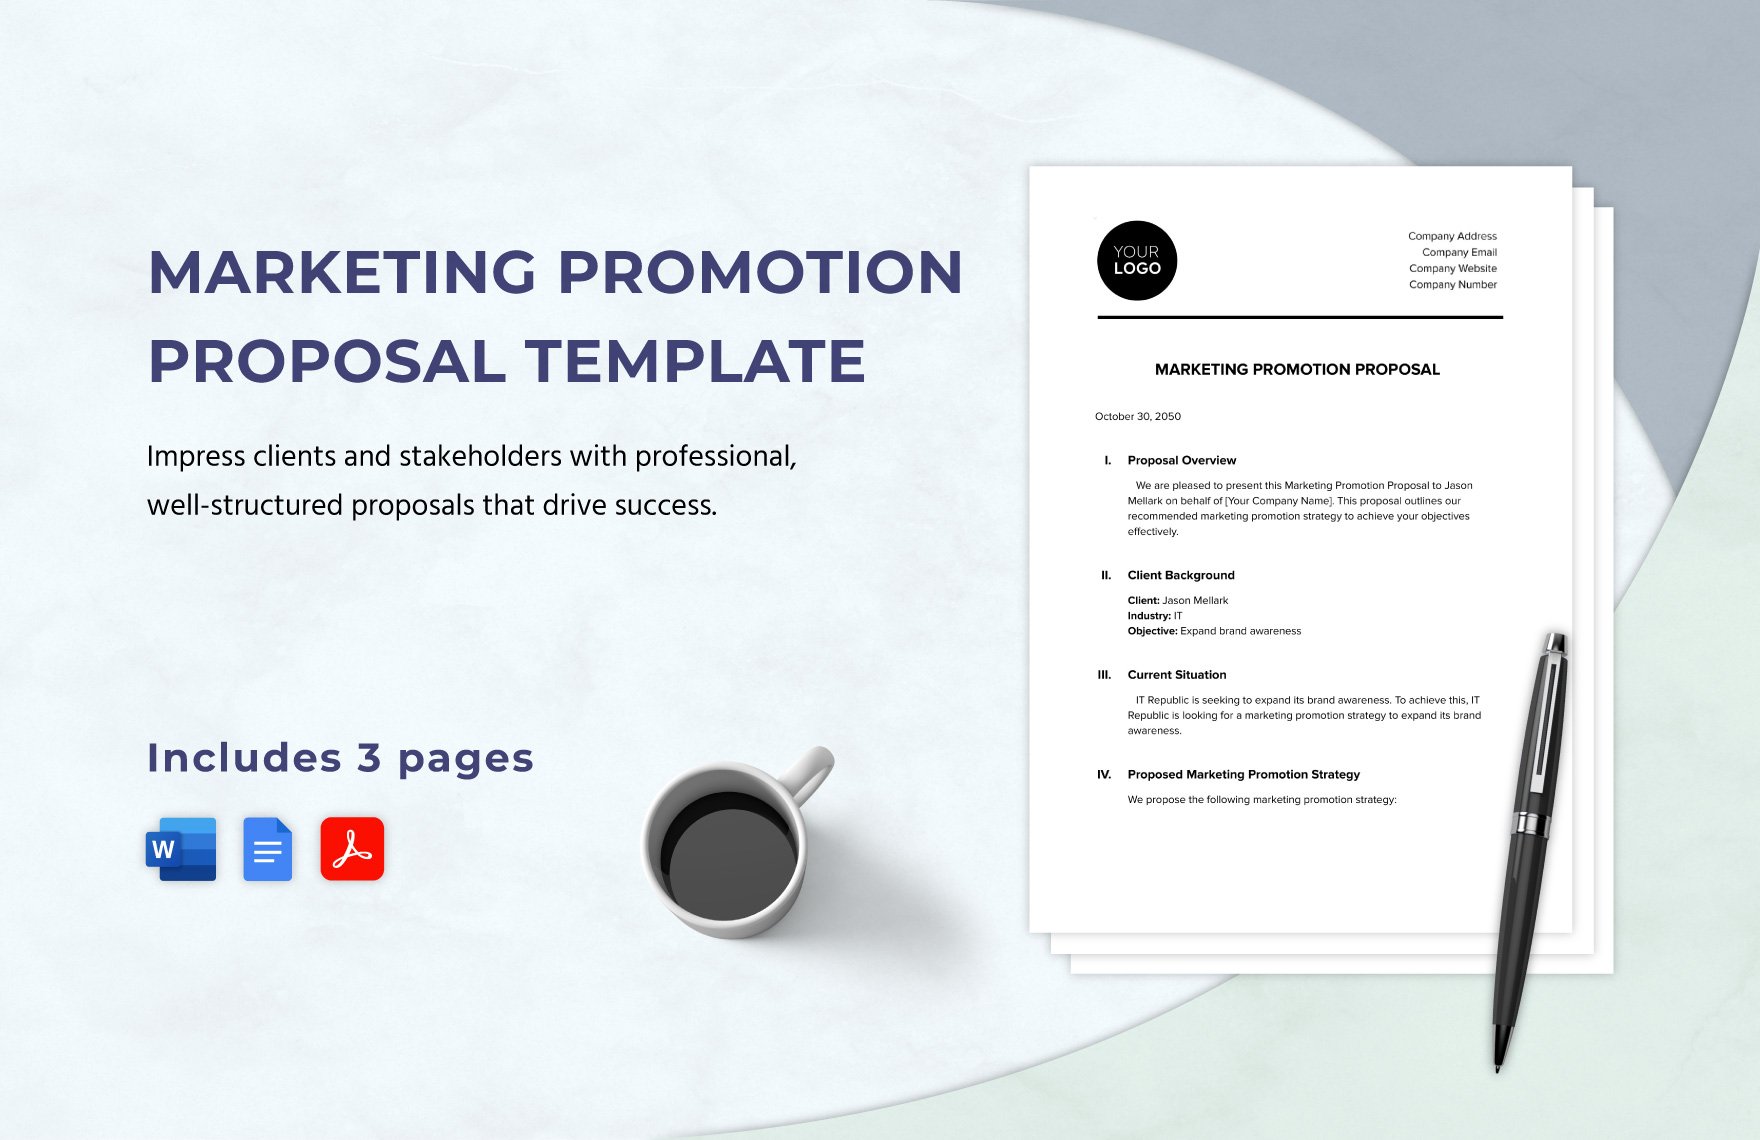 Marketing Promotion Proposal Template in Word, Google Docs, PDF